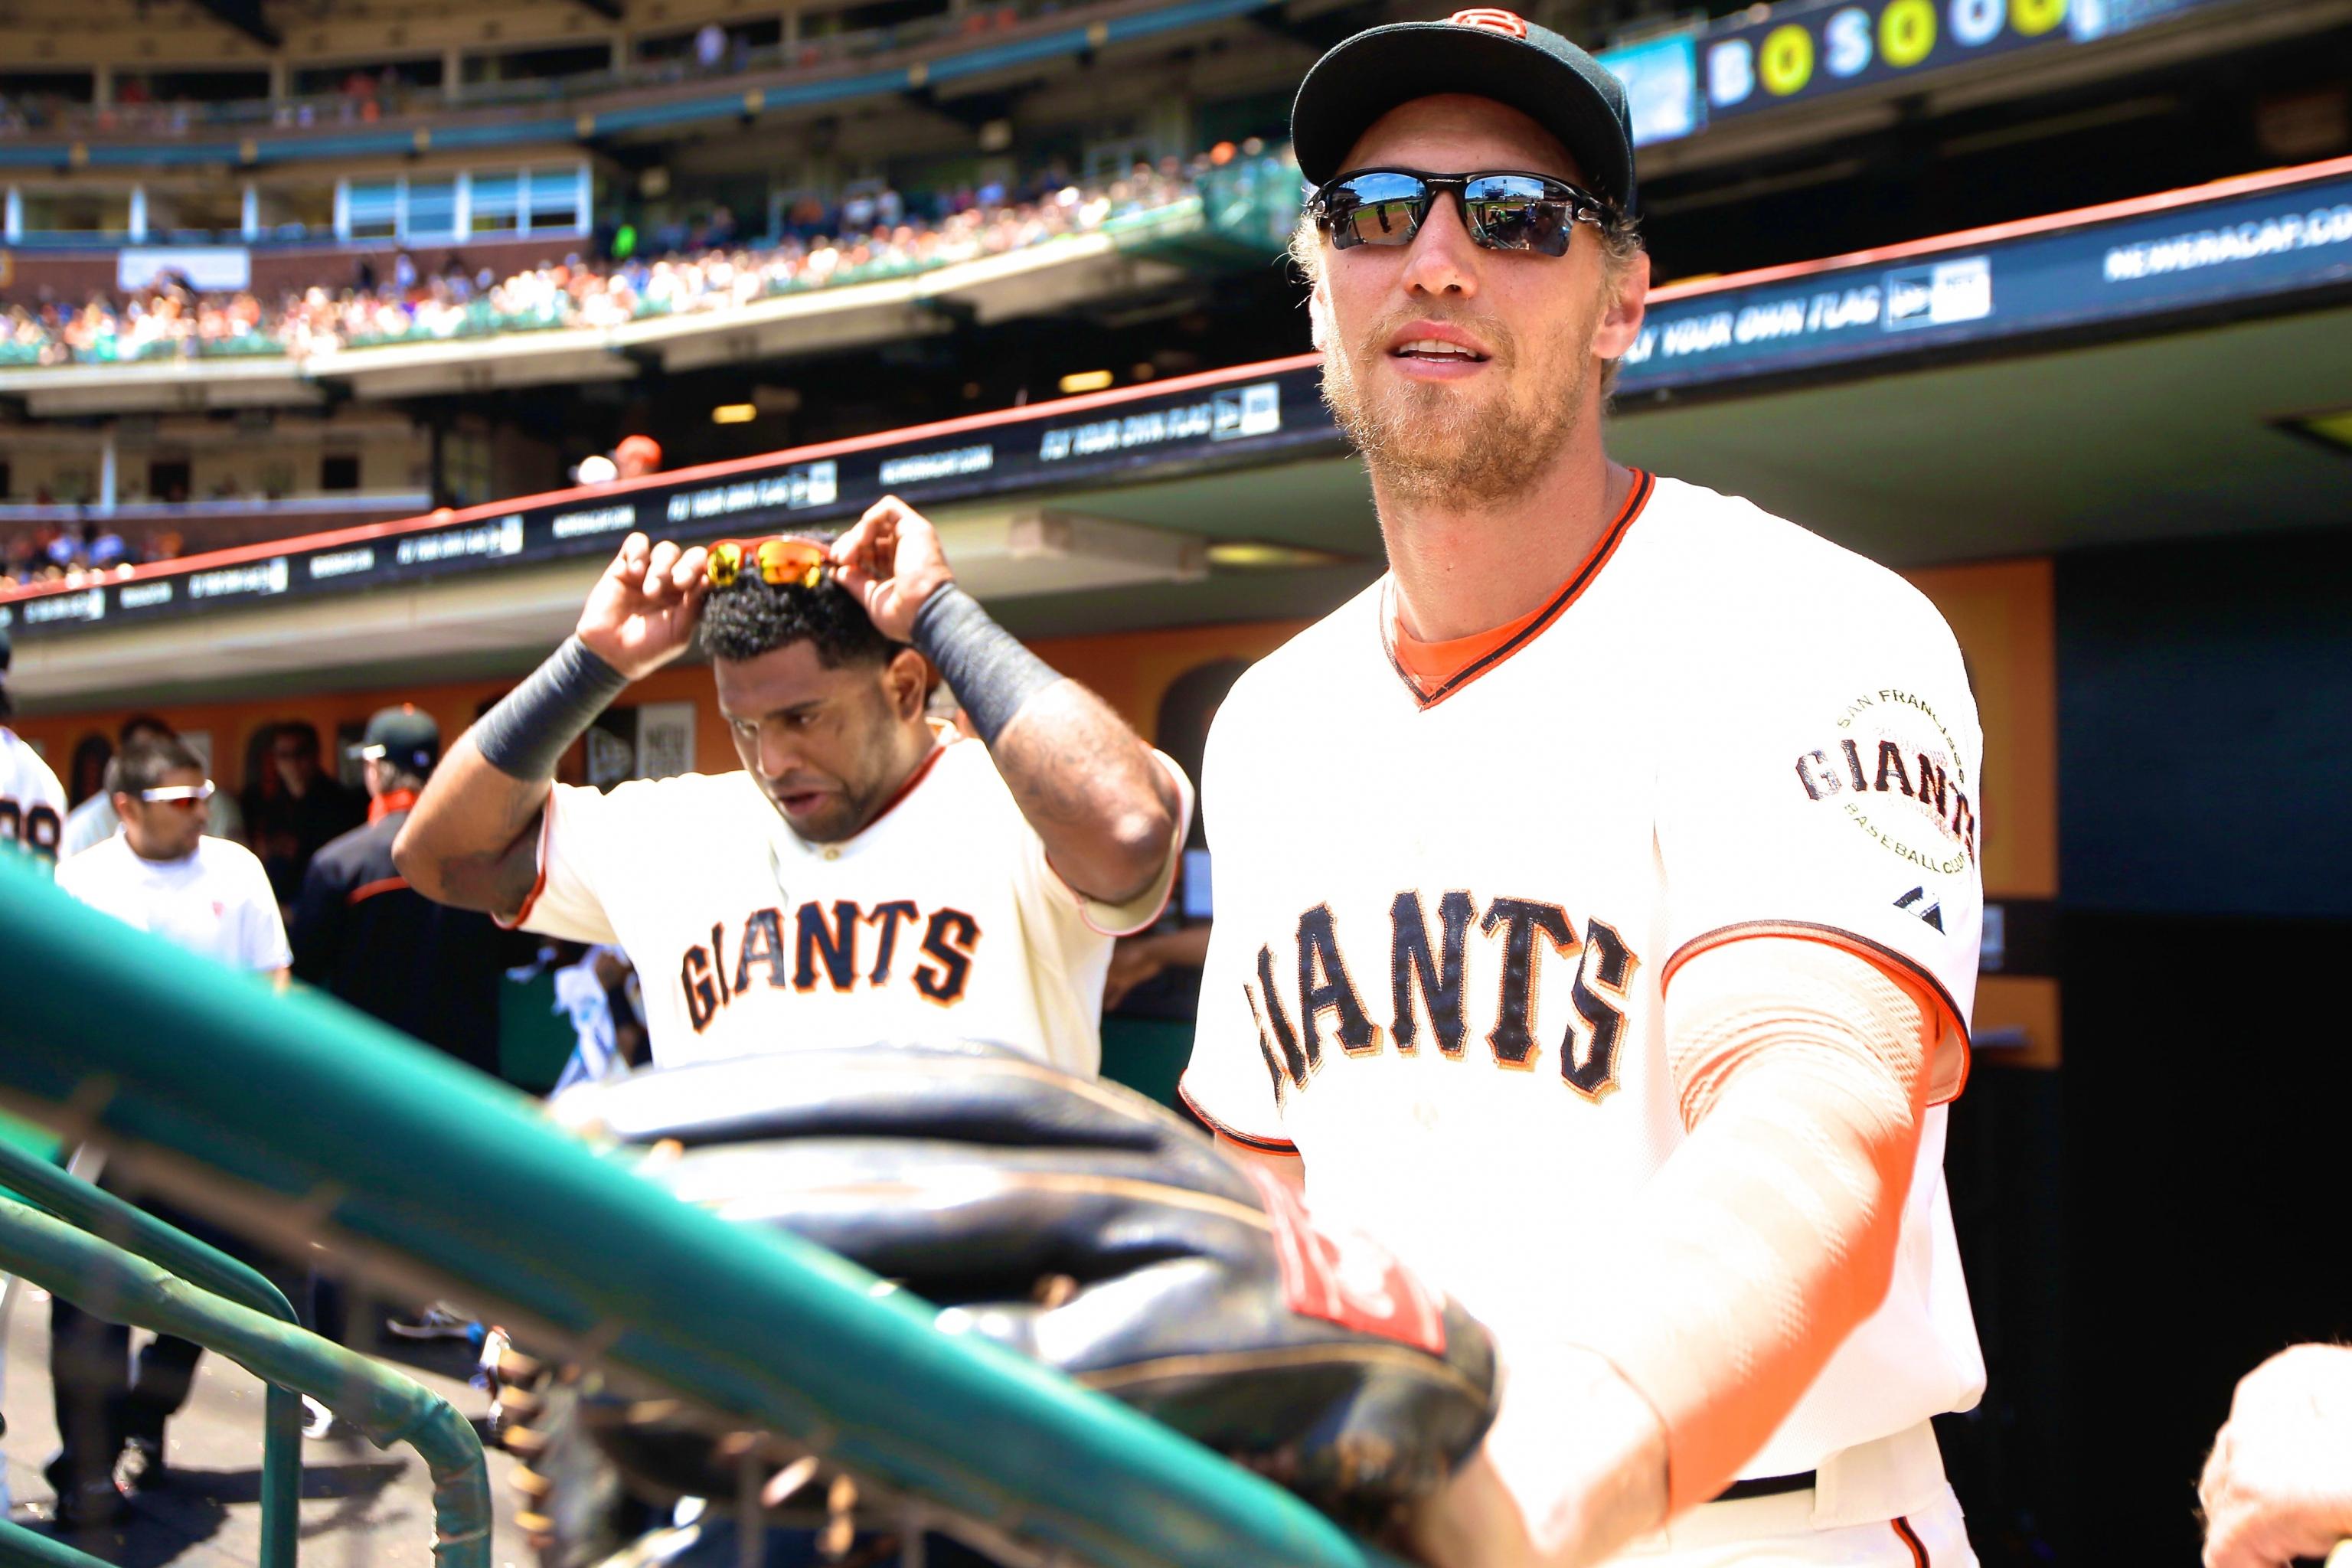 San Francisco Giants' rookies bring the 'Kenergy' to MLB dress-up day